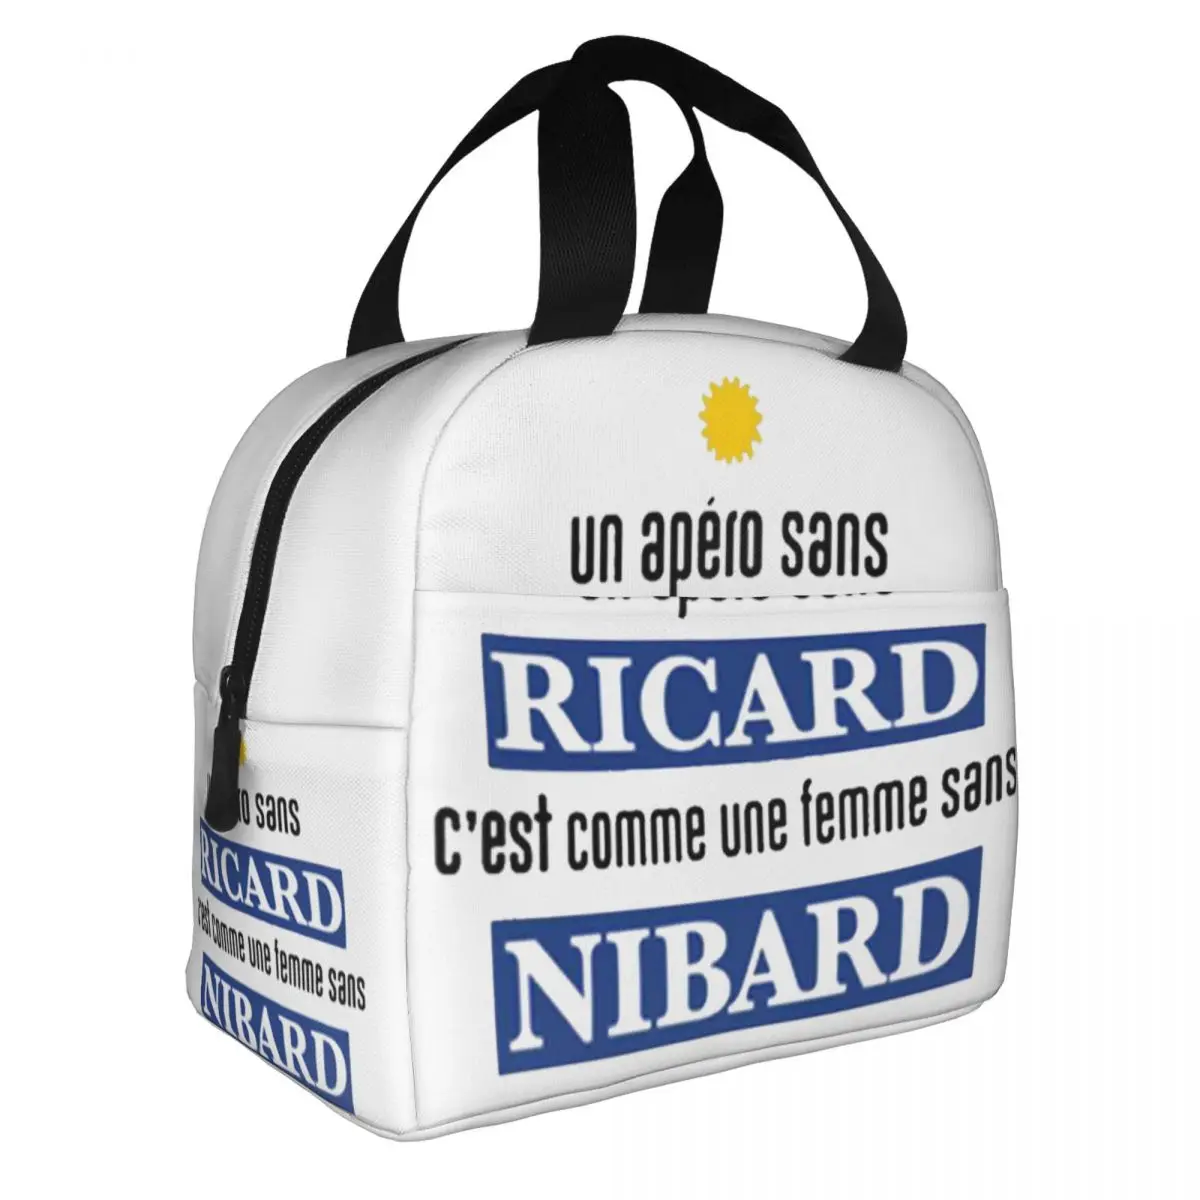 

Ricard Nibard Alcohol Drink Insulated Lunch Bags Large Humor Meal Container Thermal Bag Tote Lunch Box Travel Food Storage Bags